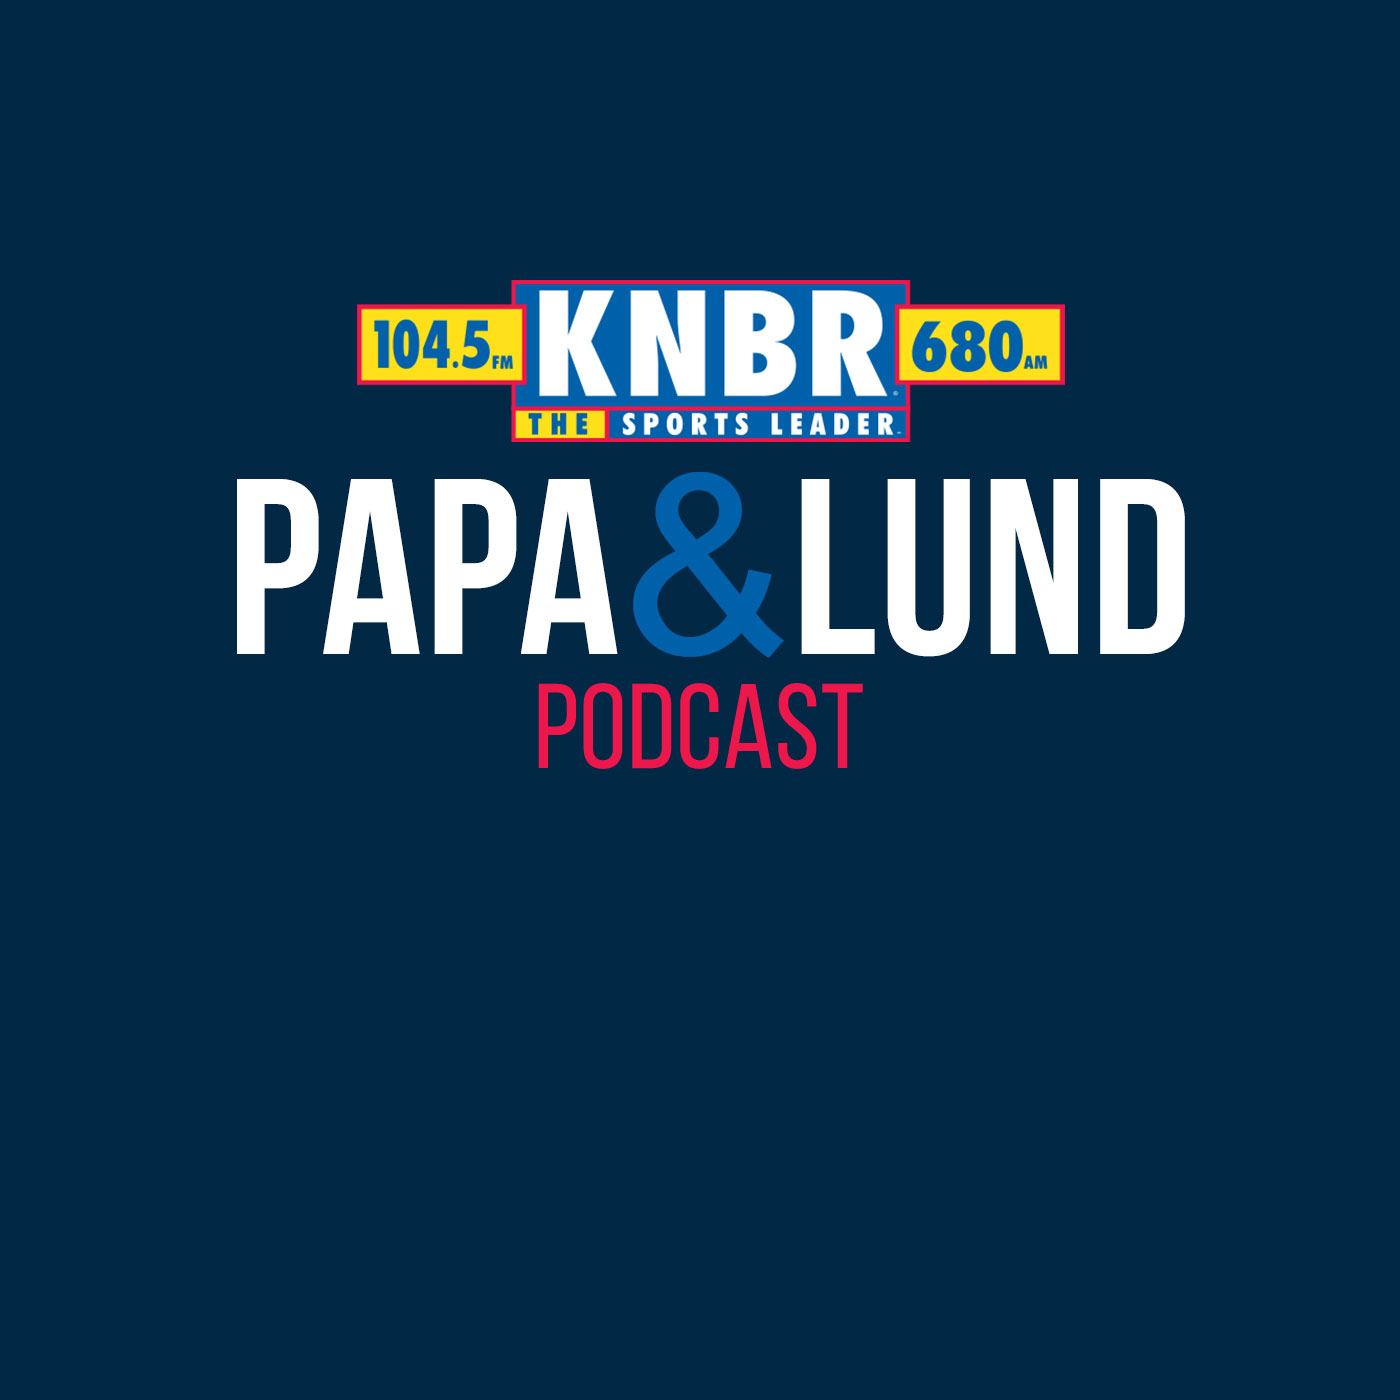 4-4 Hour 2: Papa and Lund continue A's relocation talk with your calls